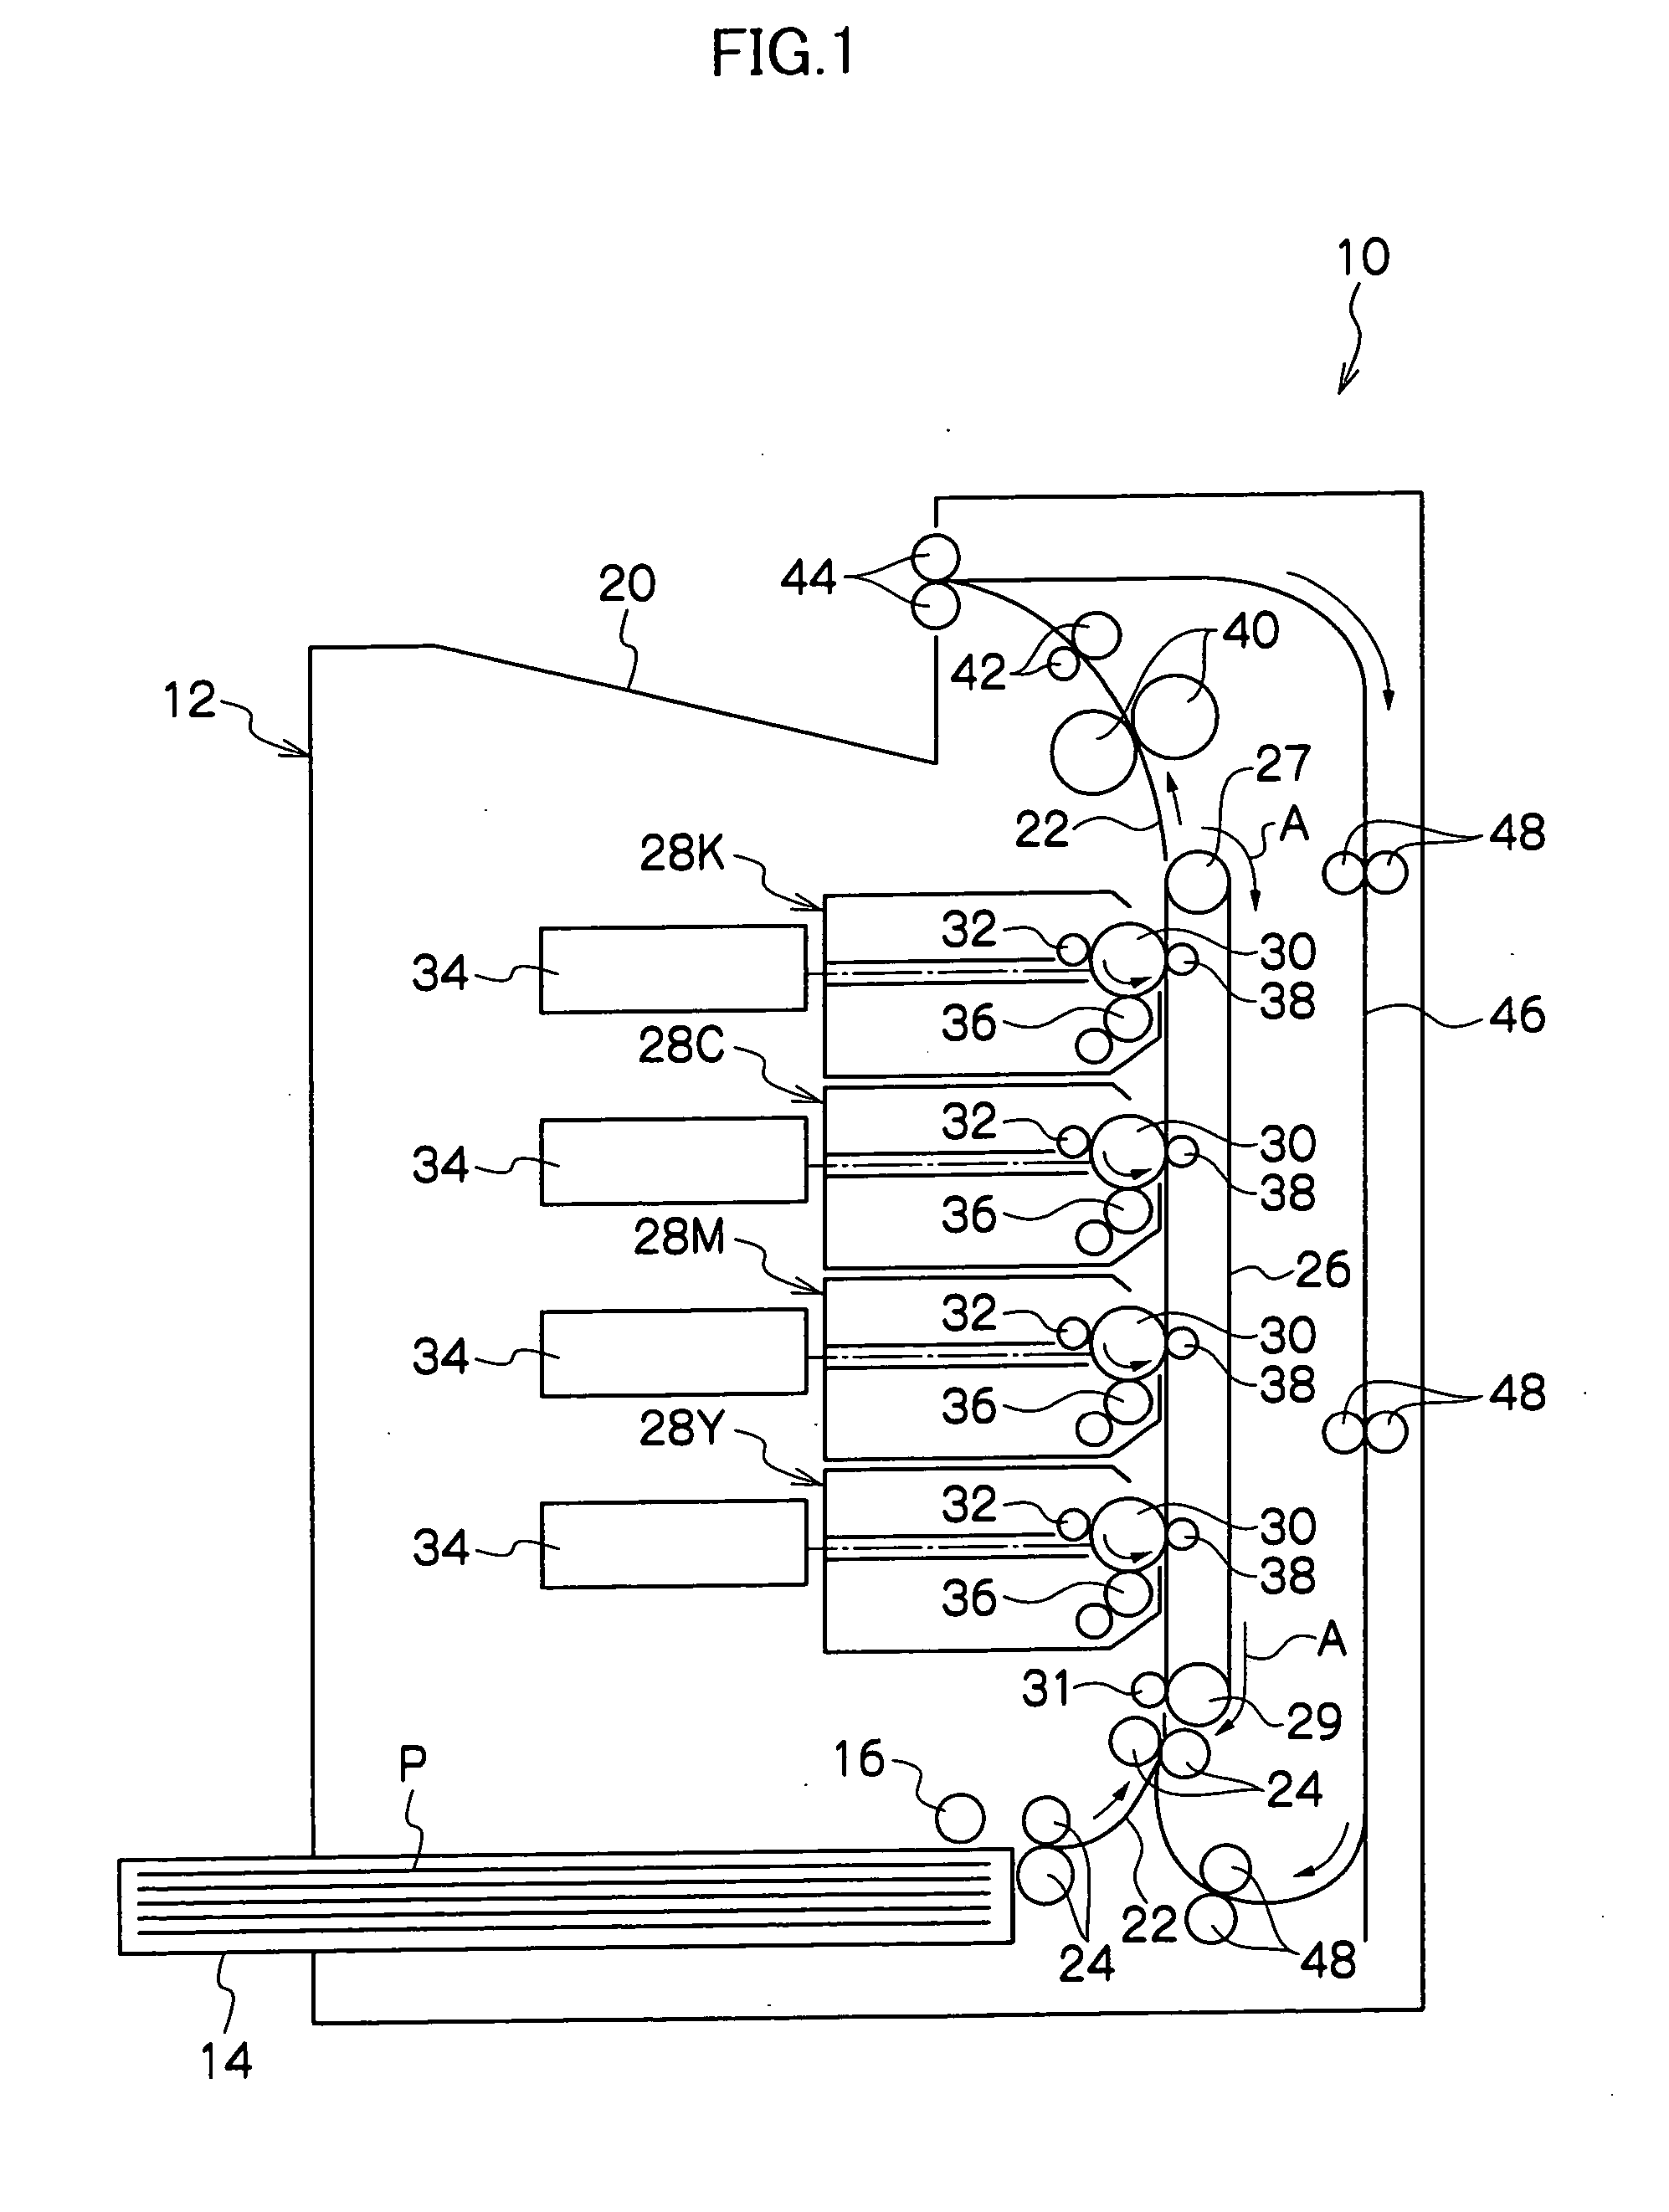 Image formation device